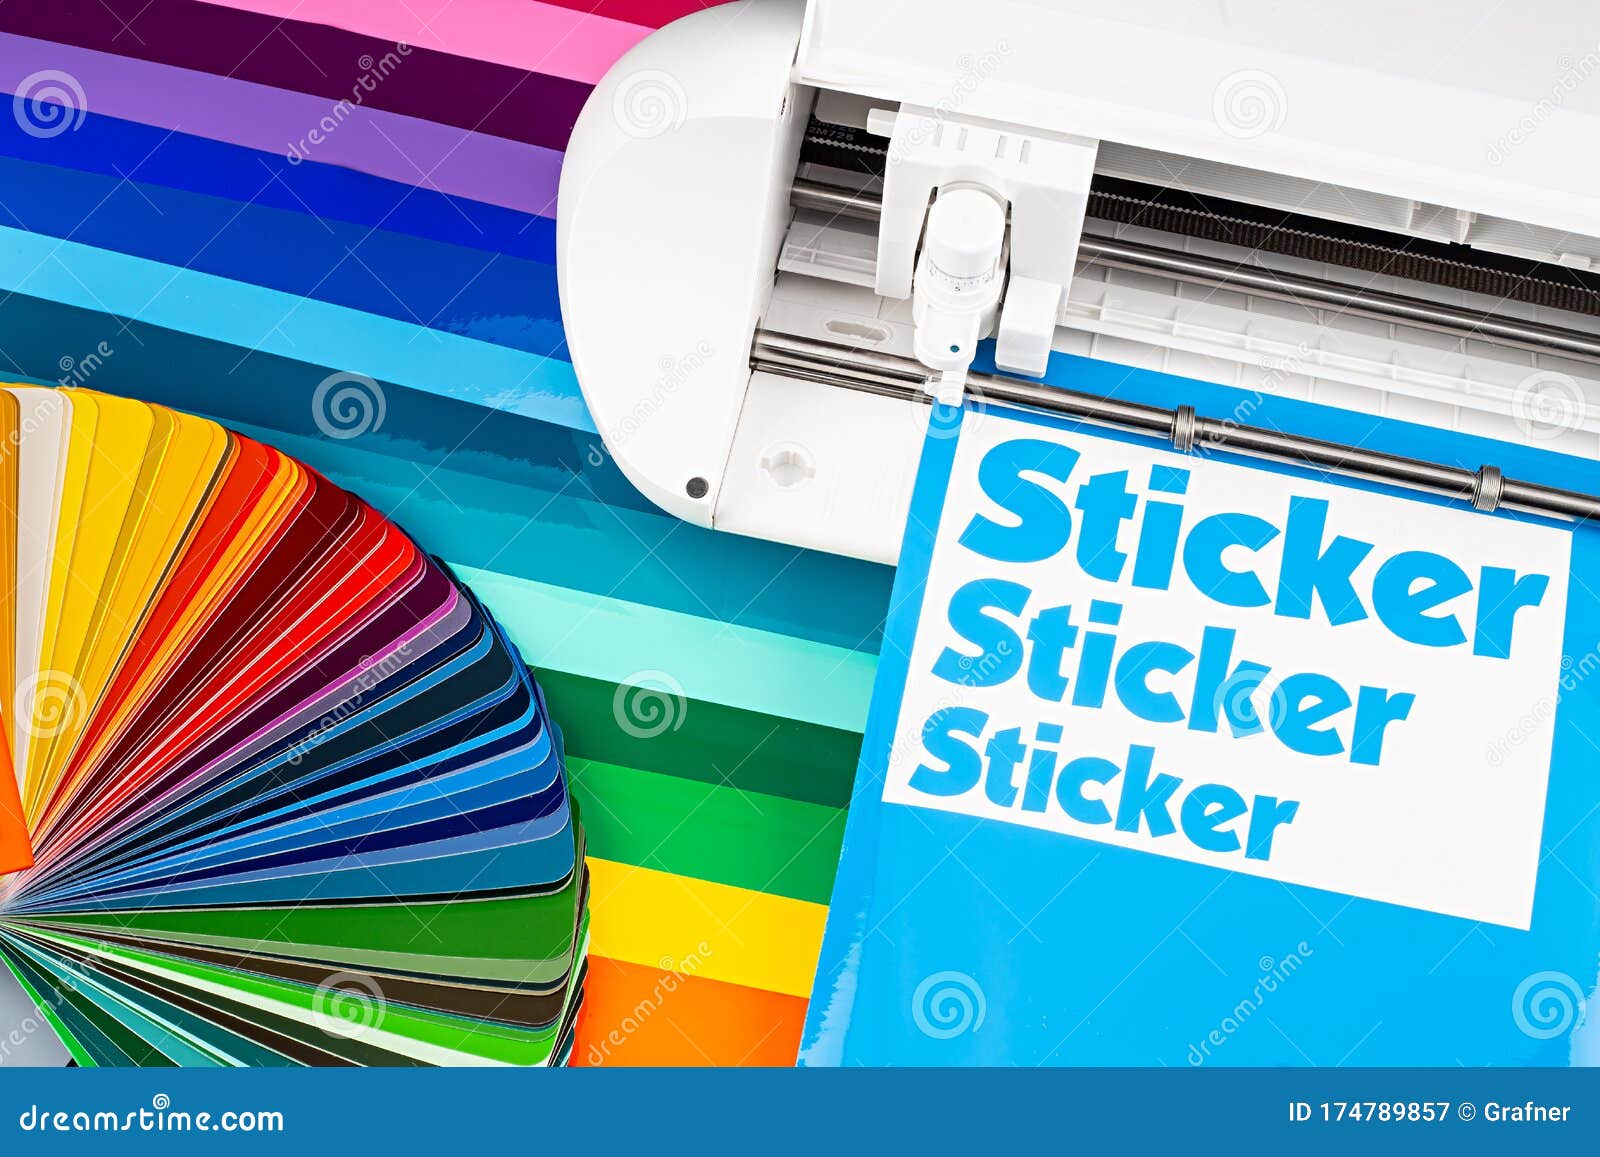 production making sticker with plotter cutting machine sheets of colorful various rainbow colored vinyl fim with color fan. guide